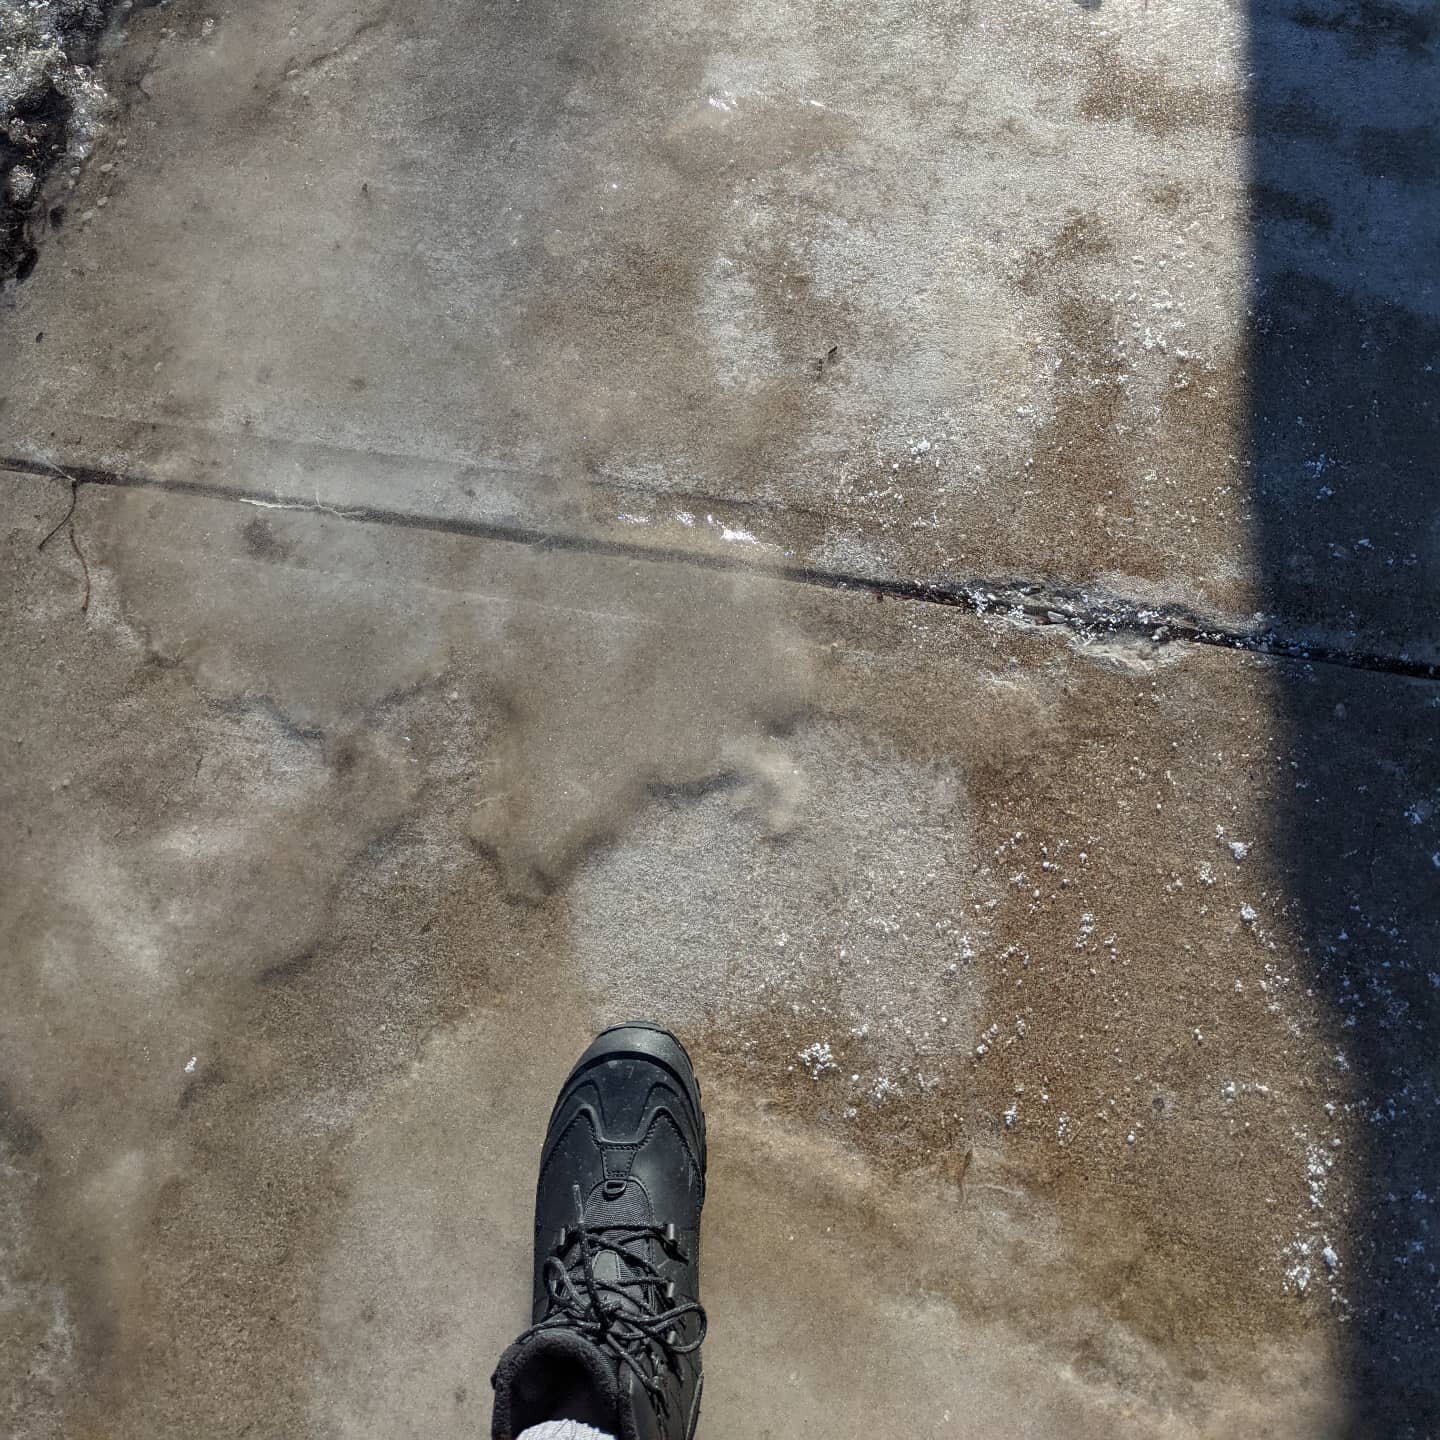 My wellness Wednesday reminder this week is to be careful when you are walking!

With the weather going up and down over the next few weeks, ice can be incredibly common on the sidewalk, and it is not always so clear. Slipping and falling on ice can 